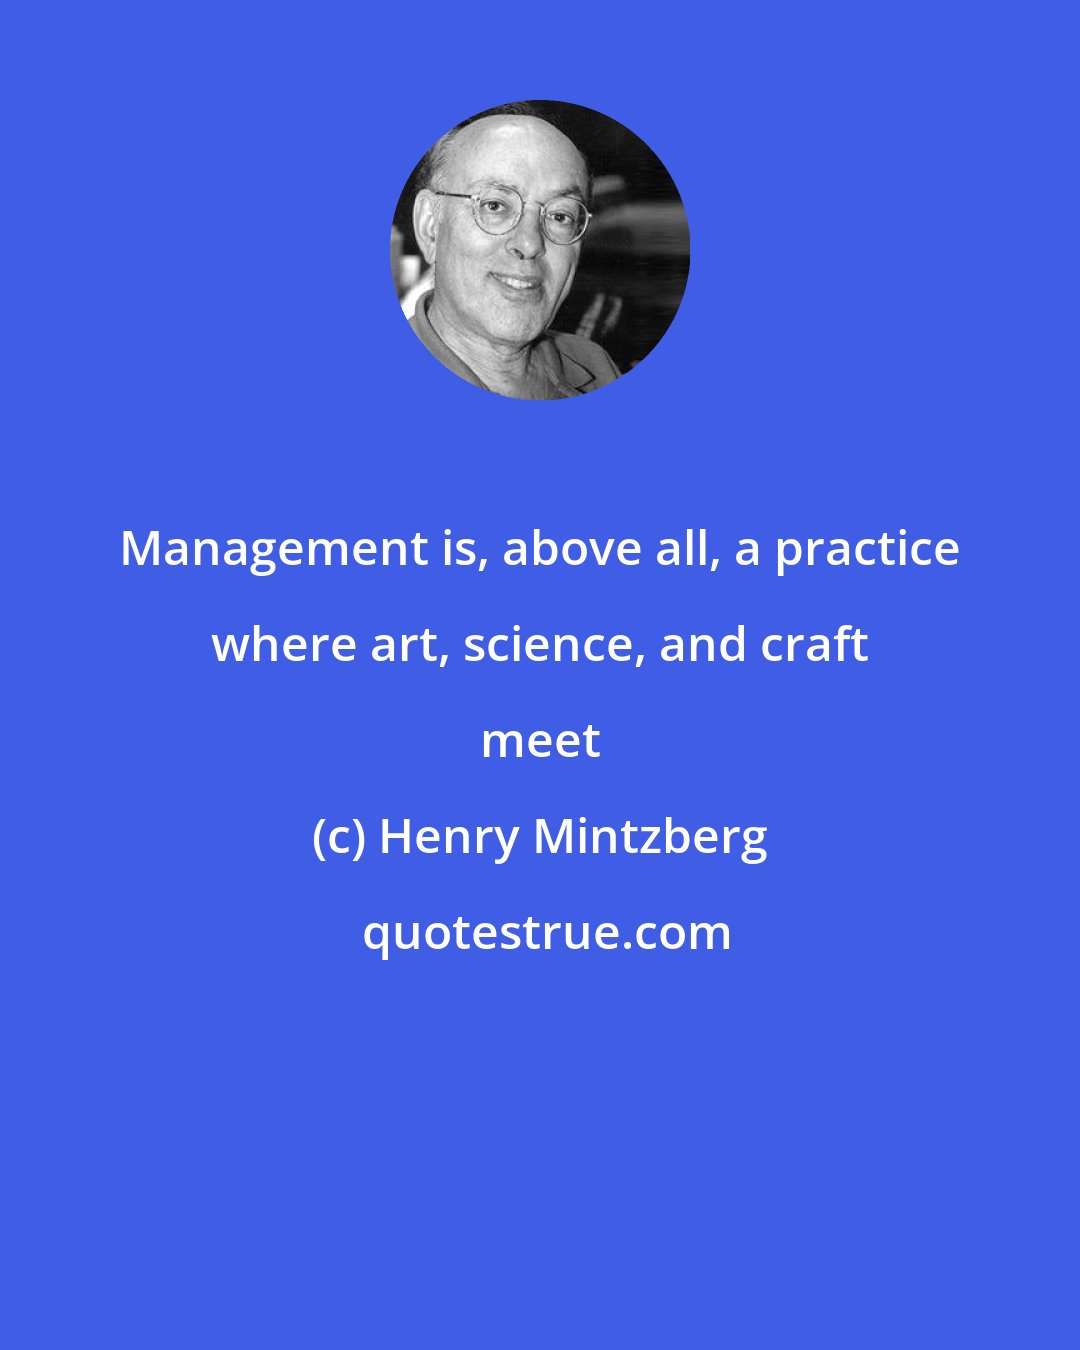 Henry Mintzberg: Management is, above all, a practice where art, science, and craft meet